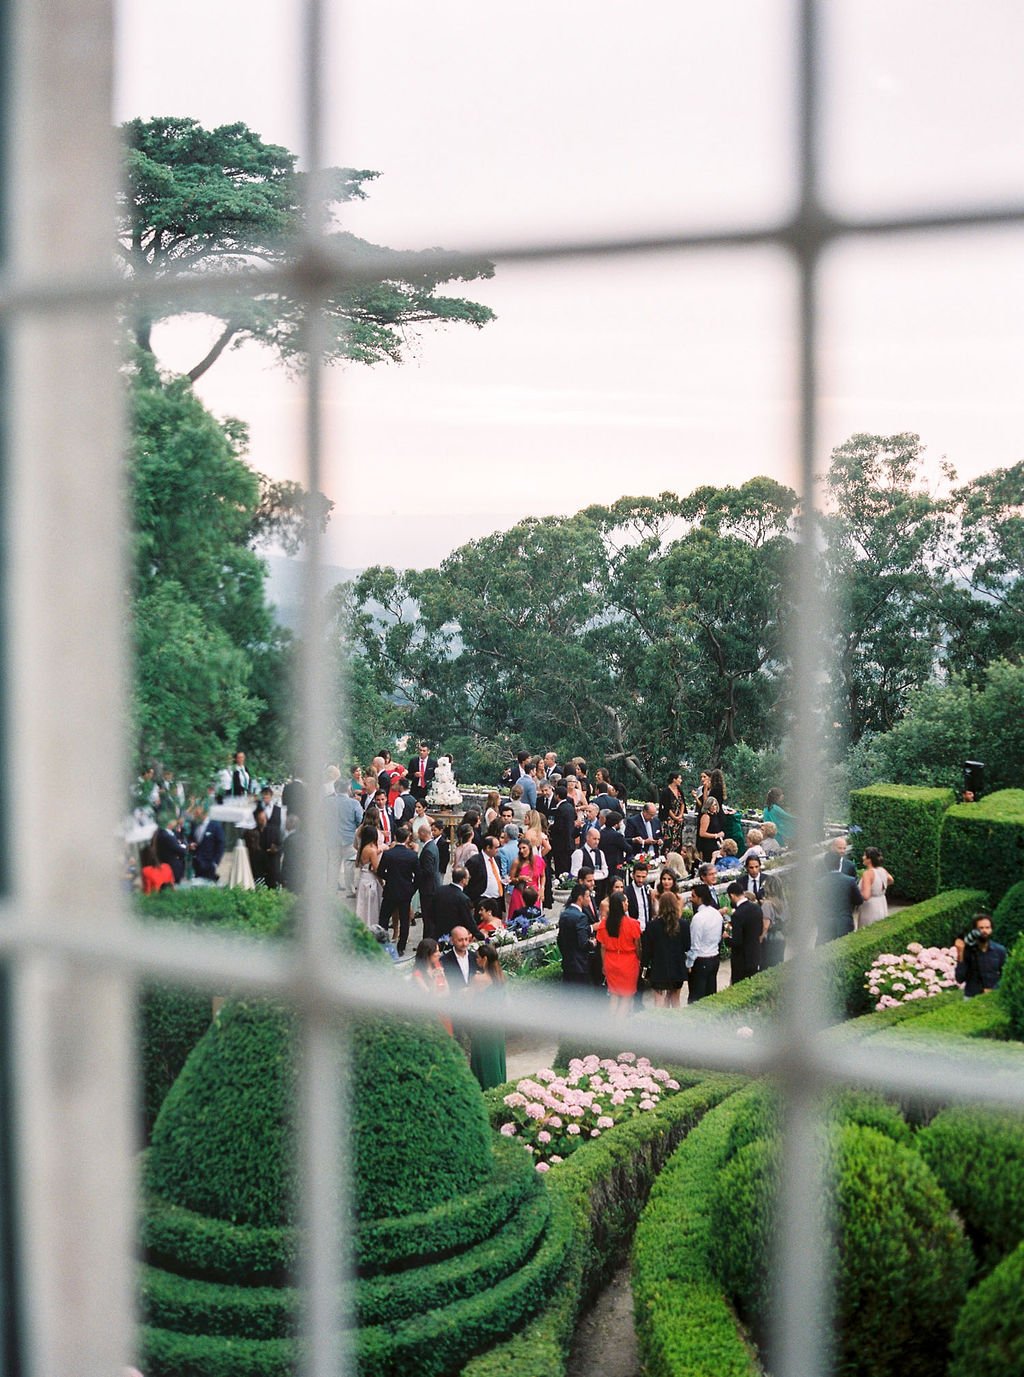 Photo from inside Palácio de Seteais though a window, showing wedding guests gathered under the tall trees in the garden for cocktail hour